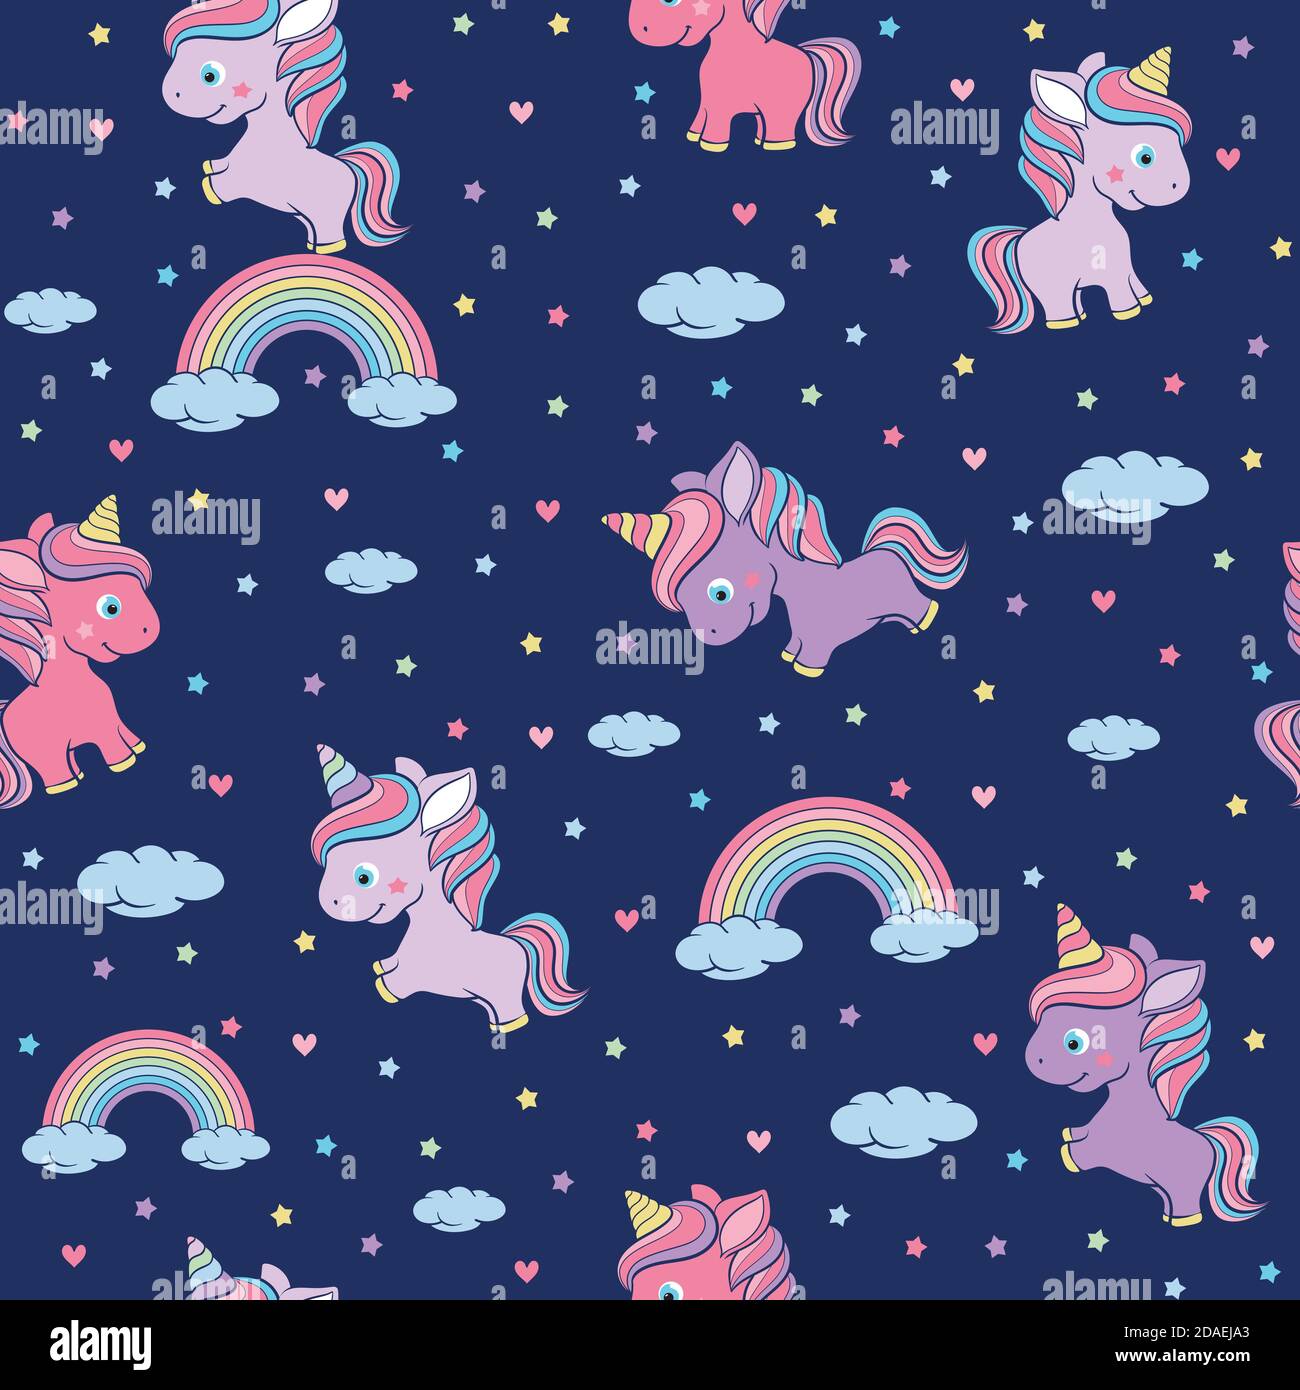 Seamless Pattern With Cute Little Unicorn Clouds